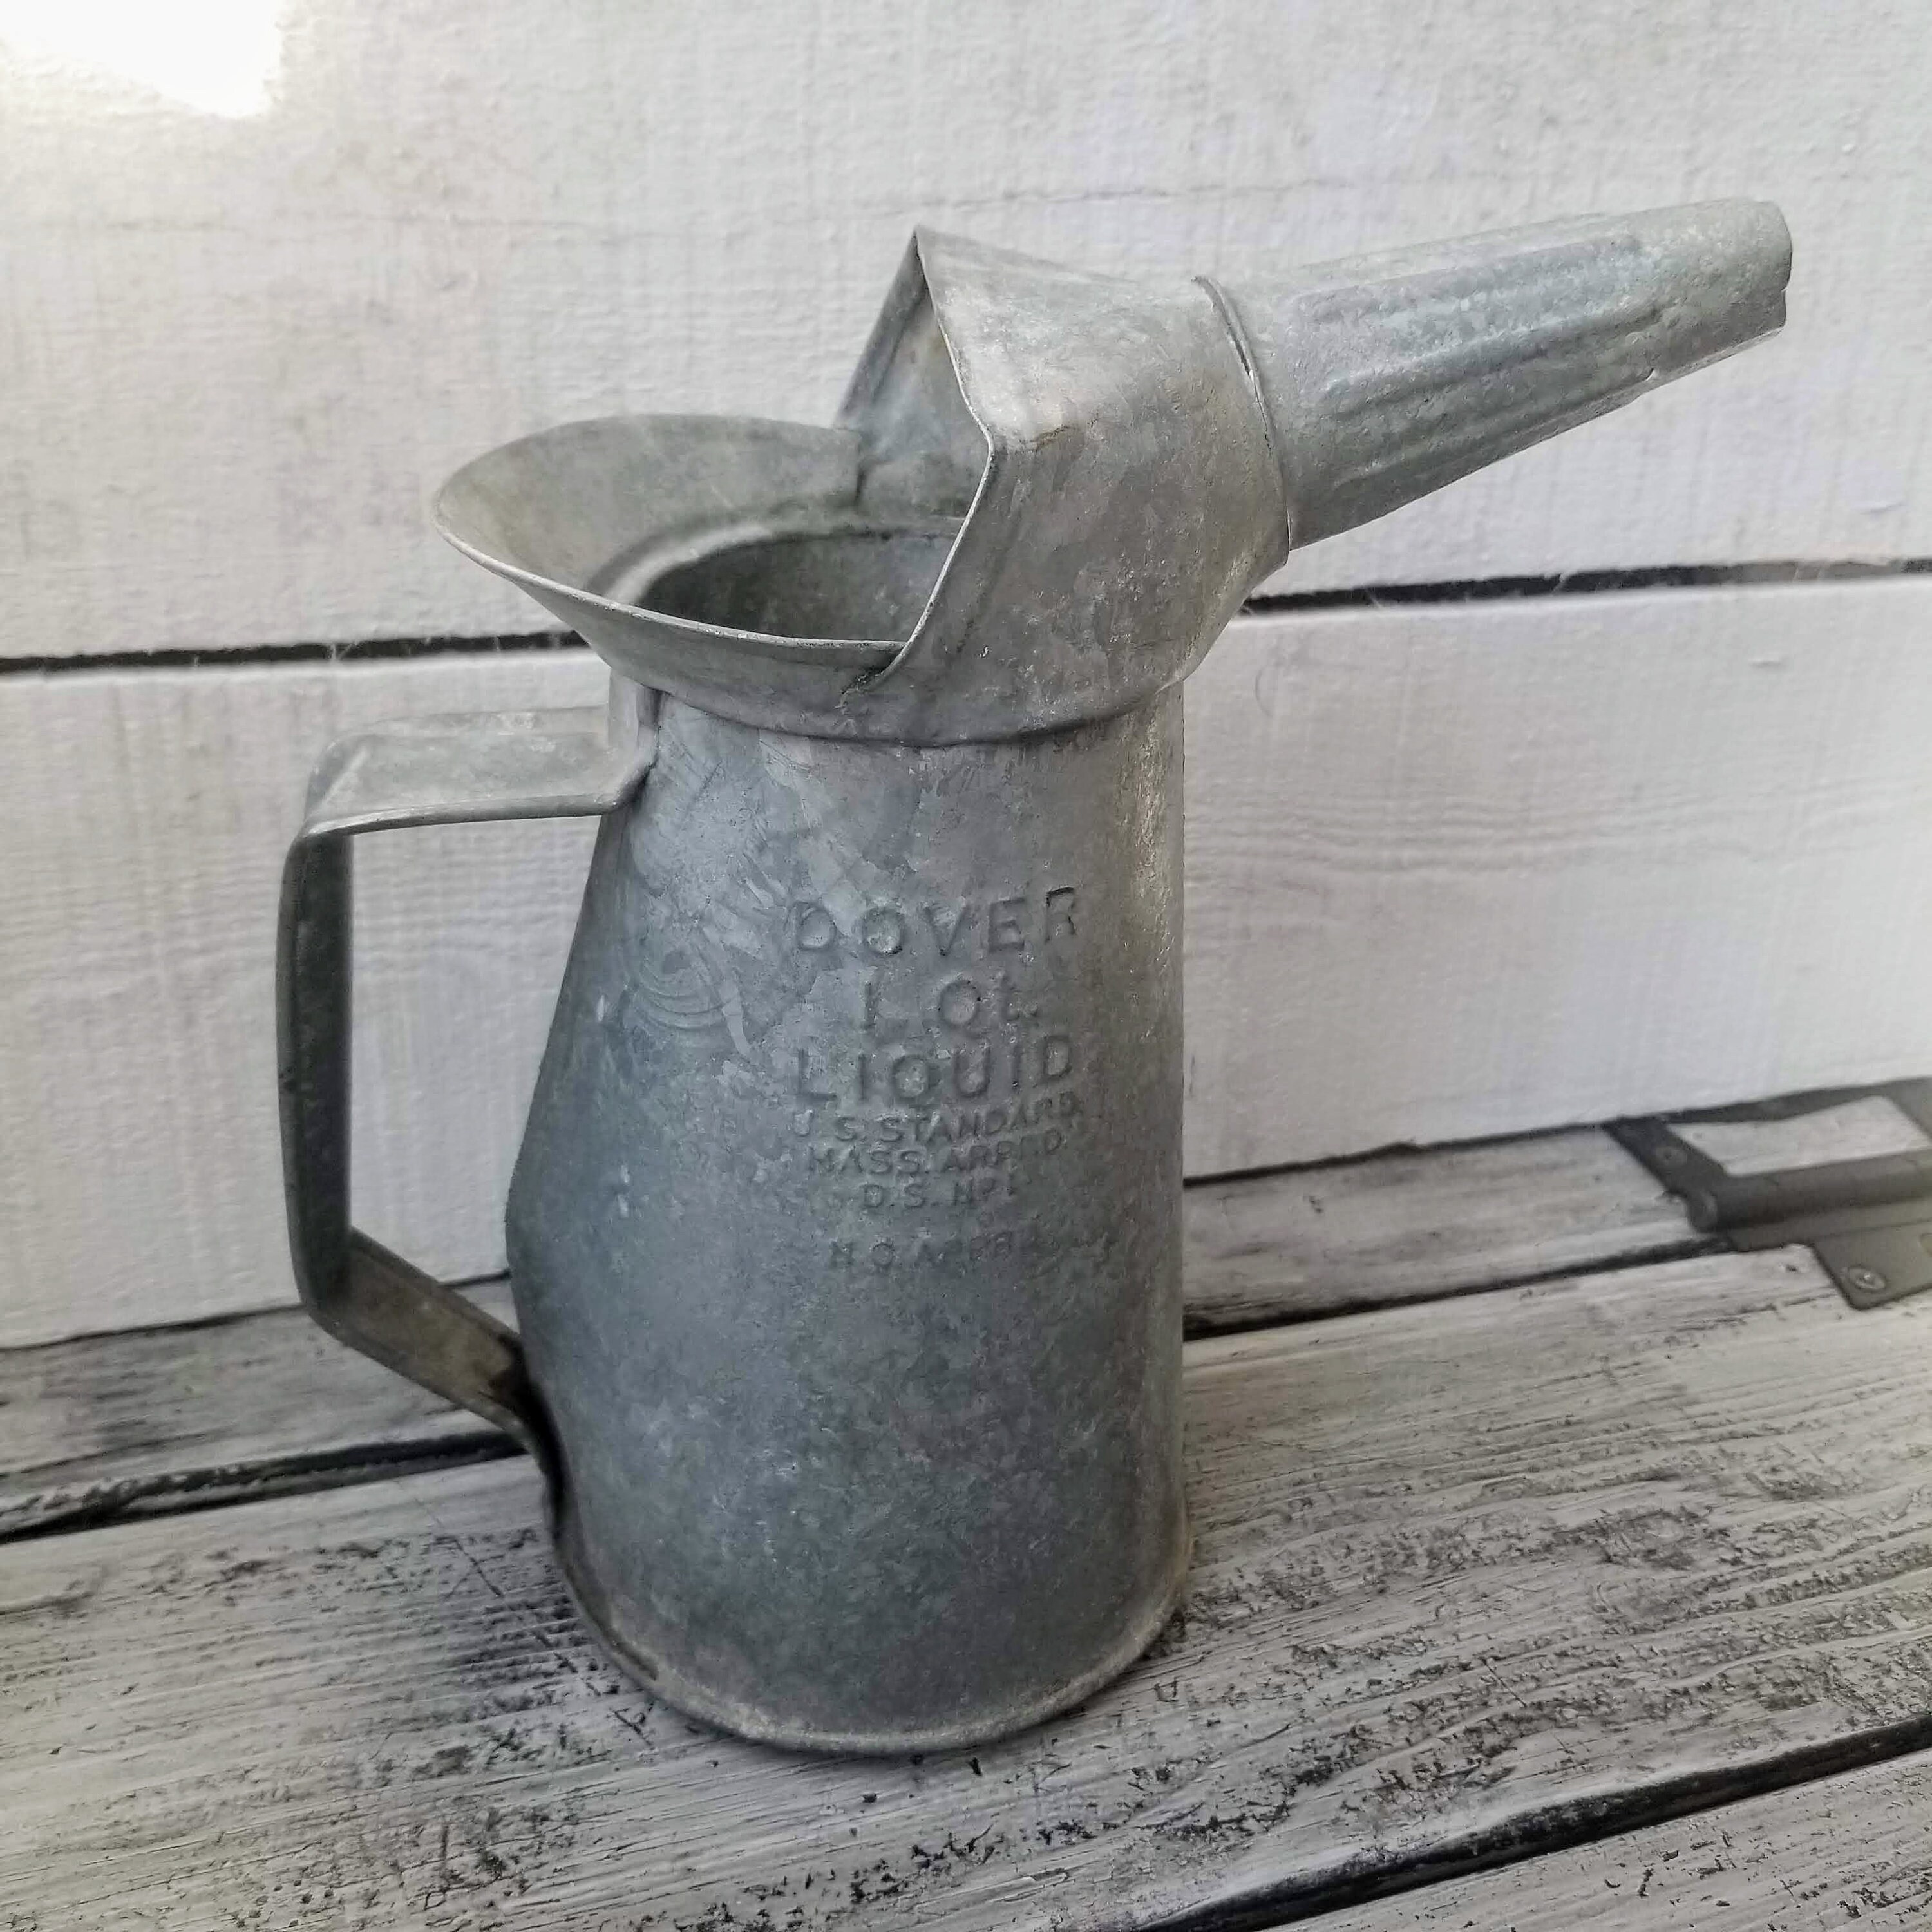 Vintage Small Thumb Metal Oil Can with Curved Spout. From the Farm Days!